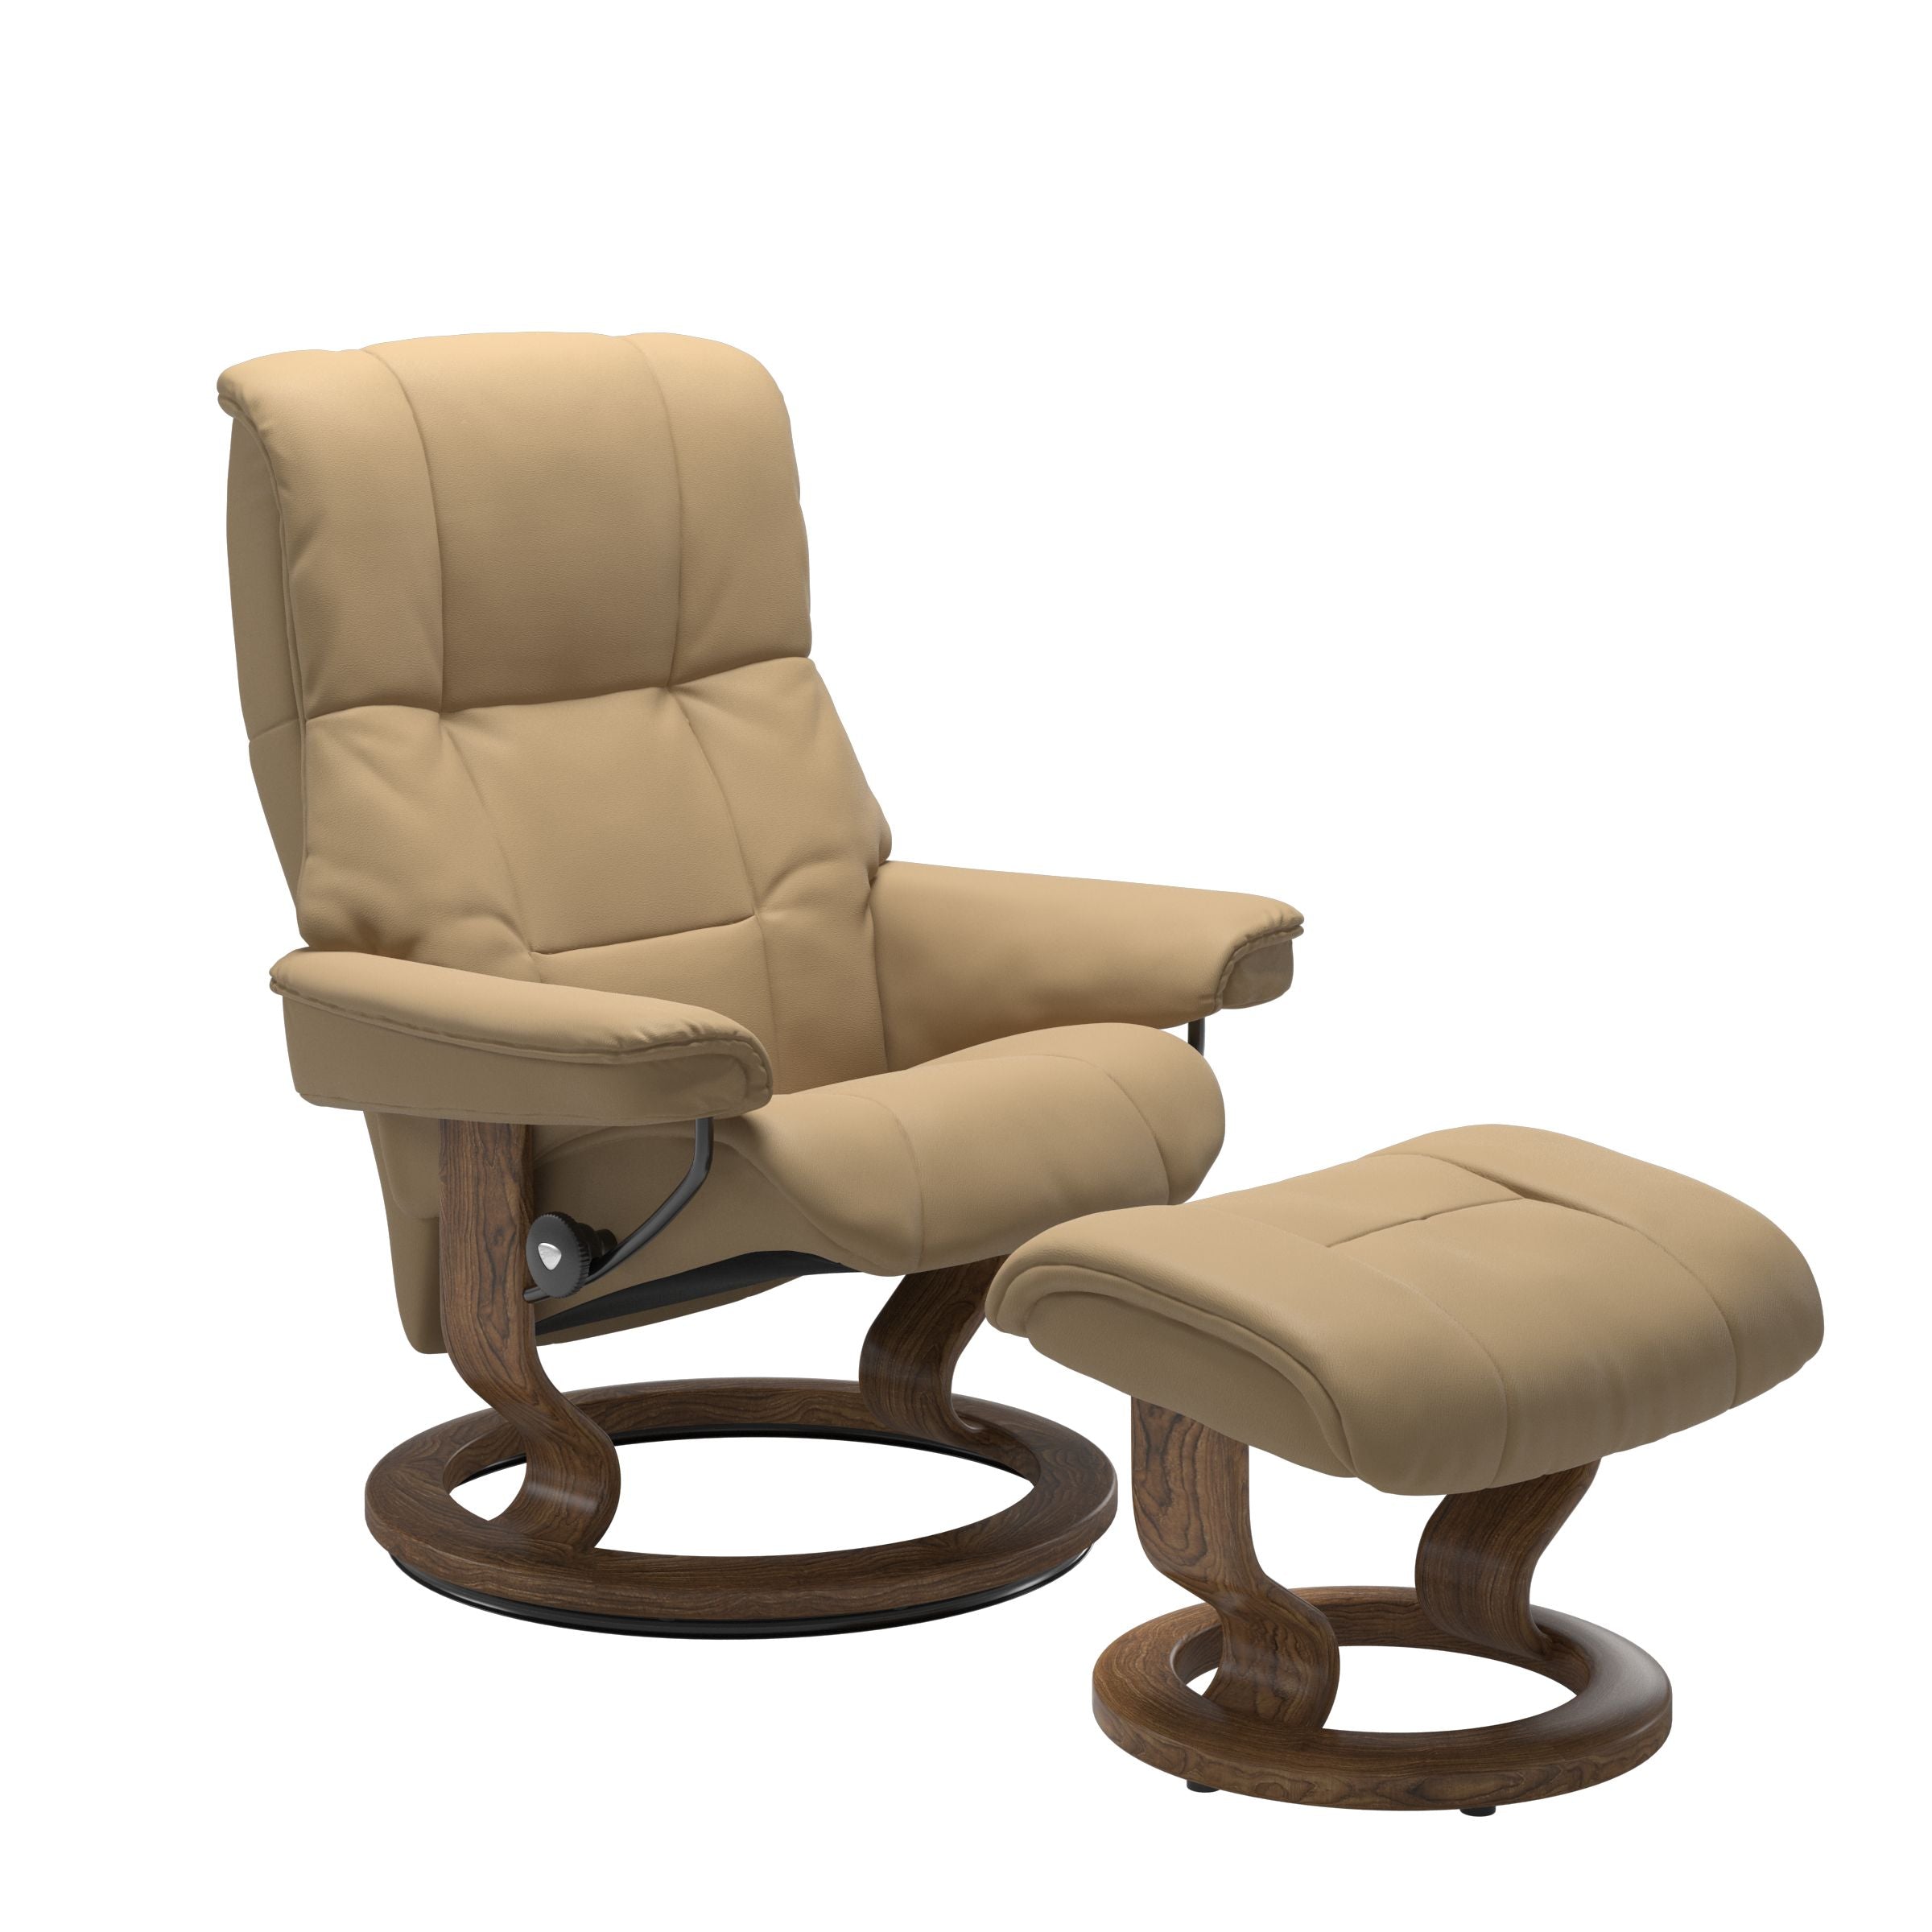 Stressless Mayfair Small Recliner and Ottoman with Classic Base